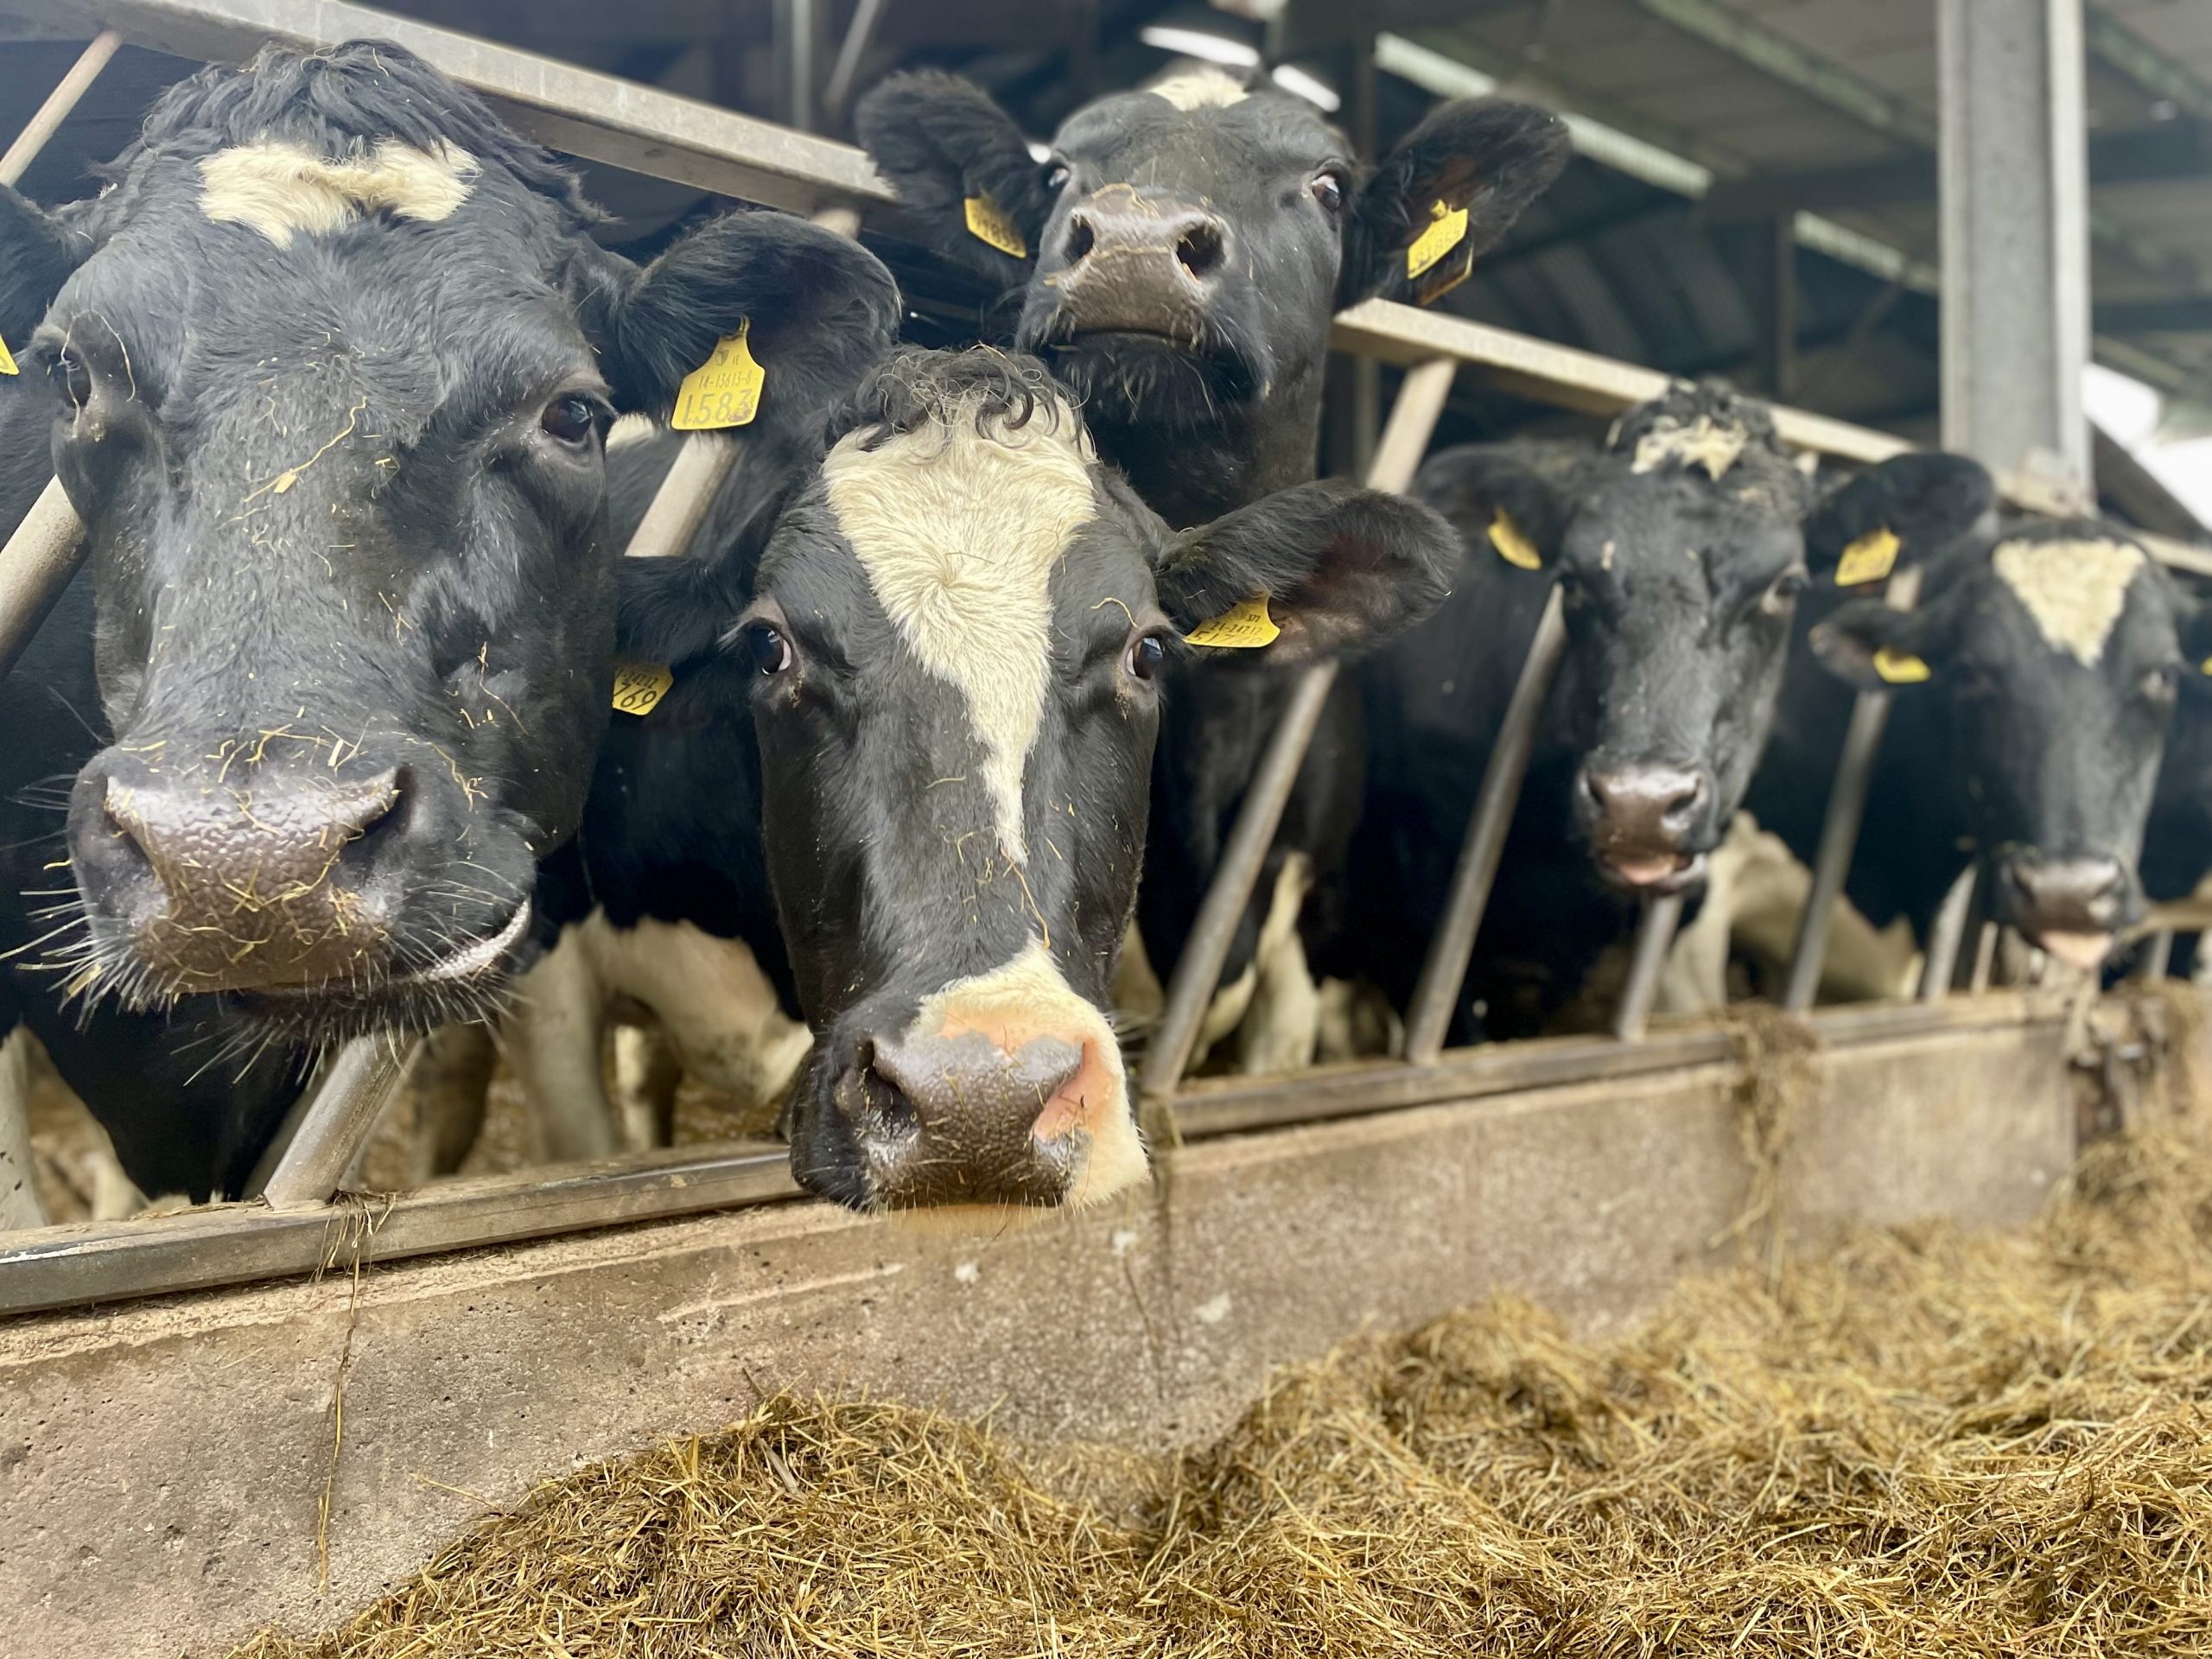 Cows in a milking parlour